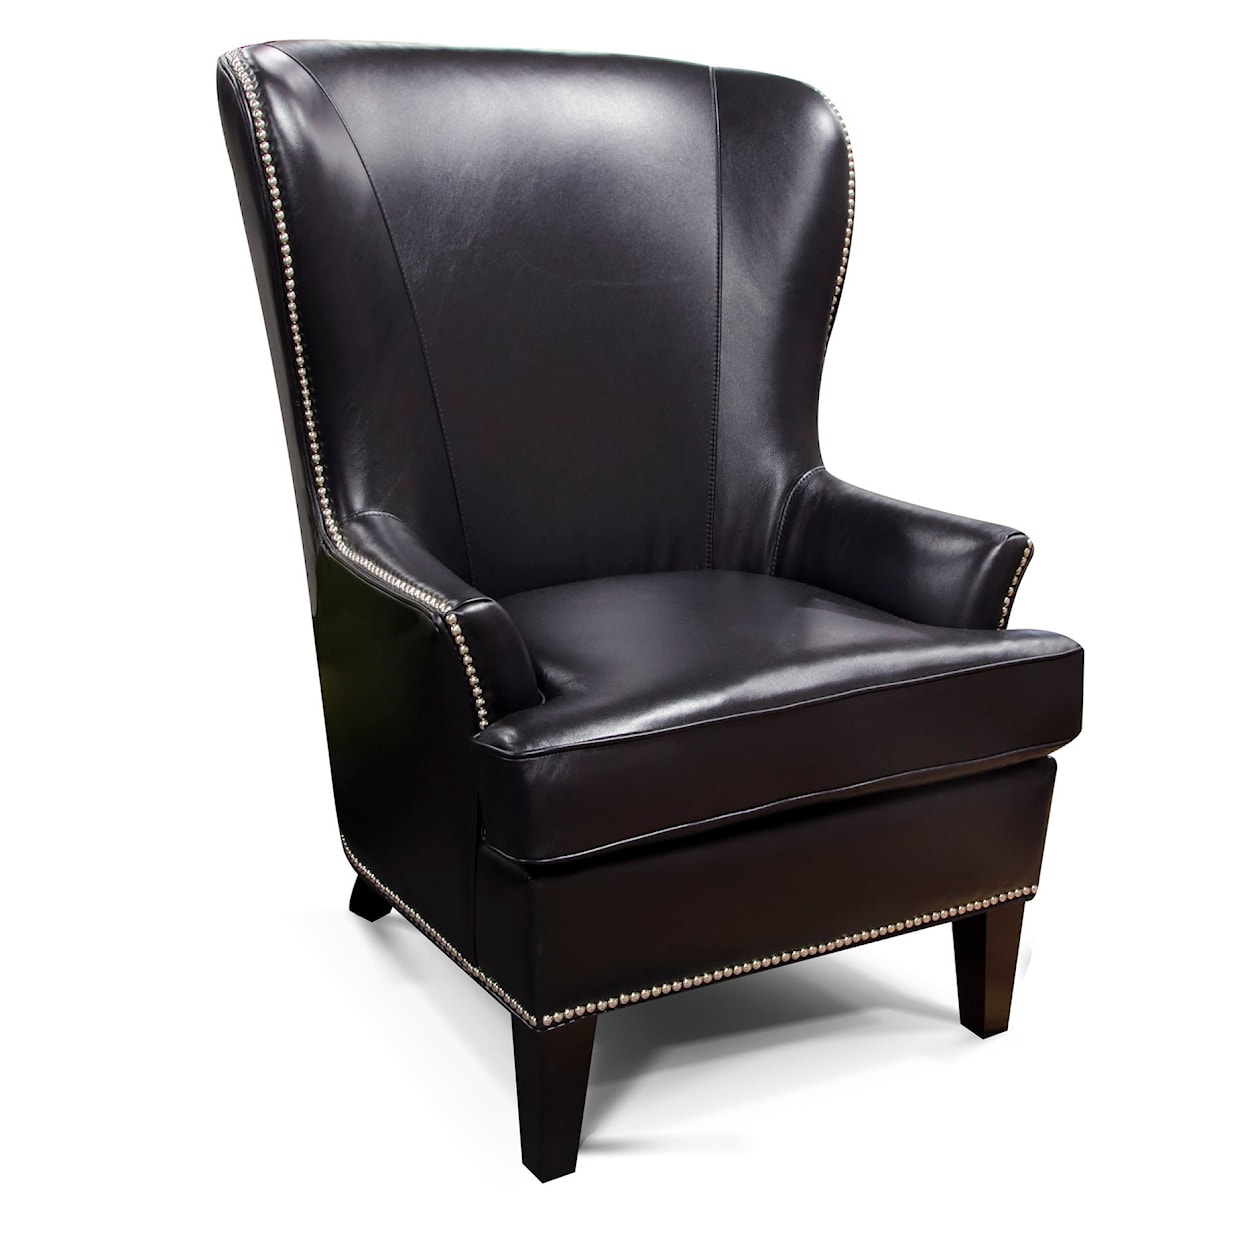 England 4530/AL /N Series Leather Wing Chair